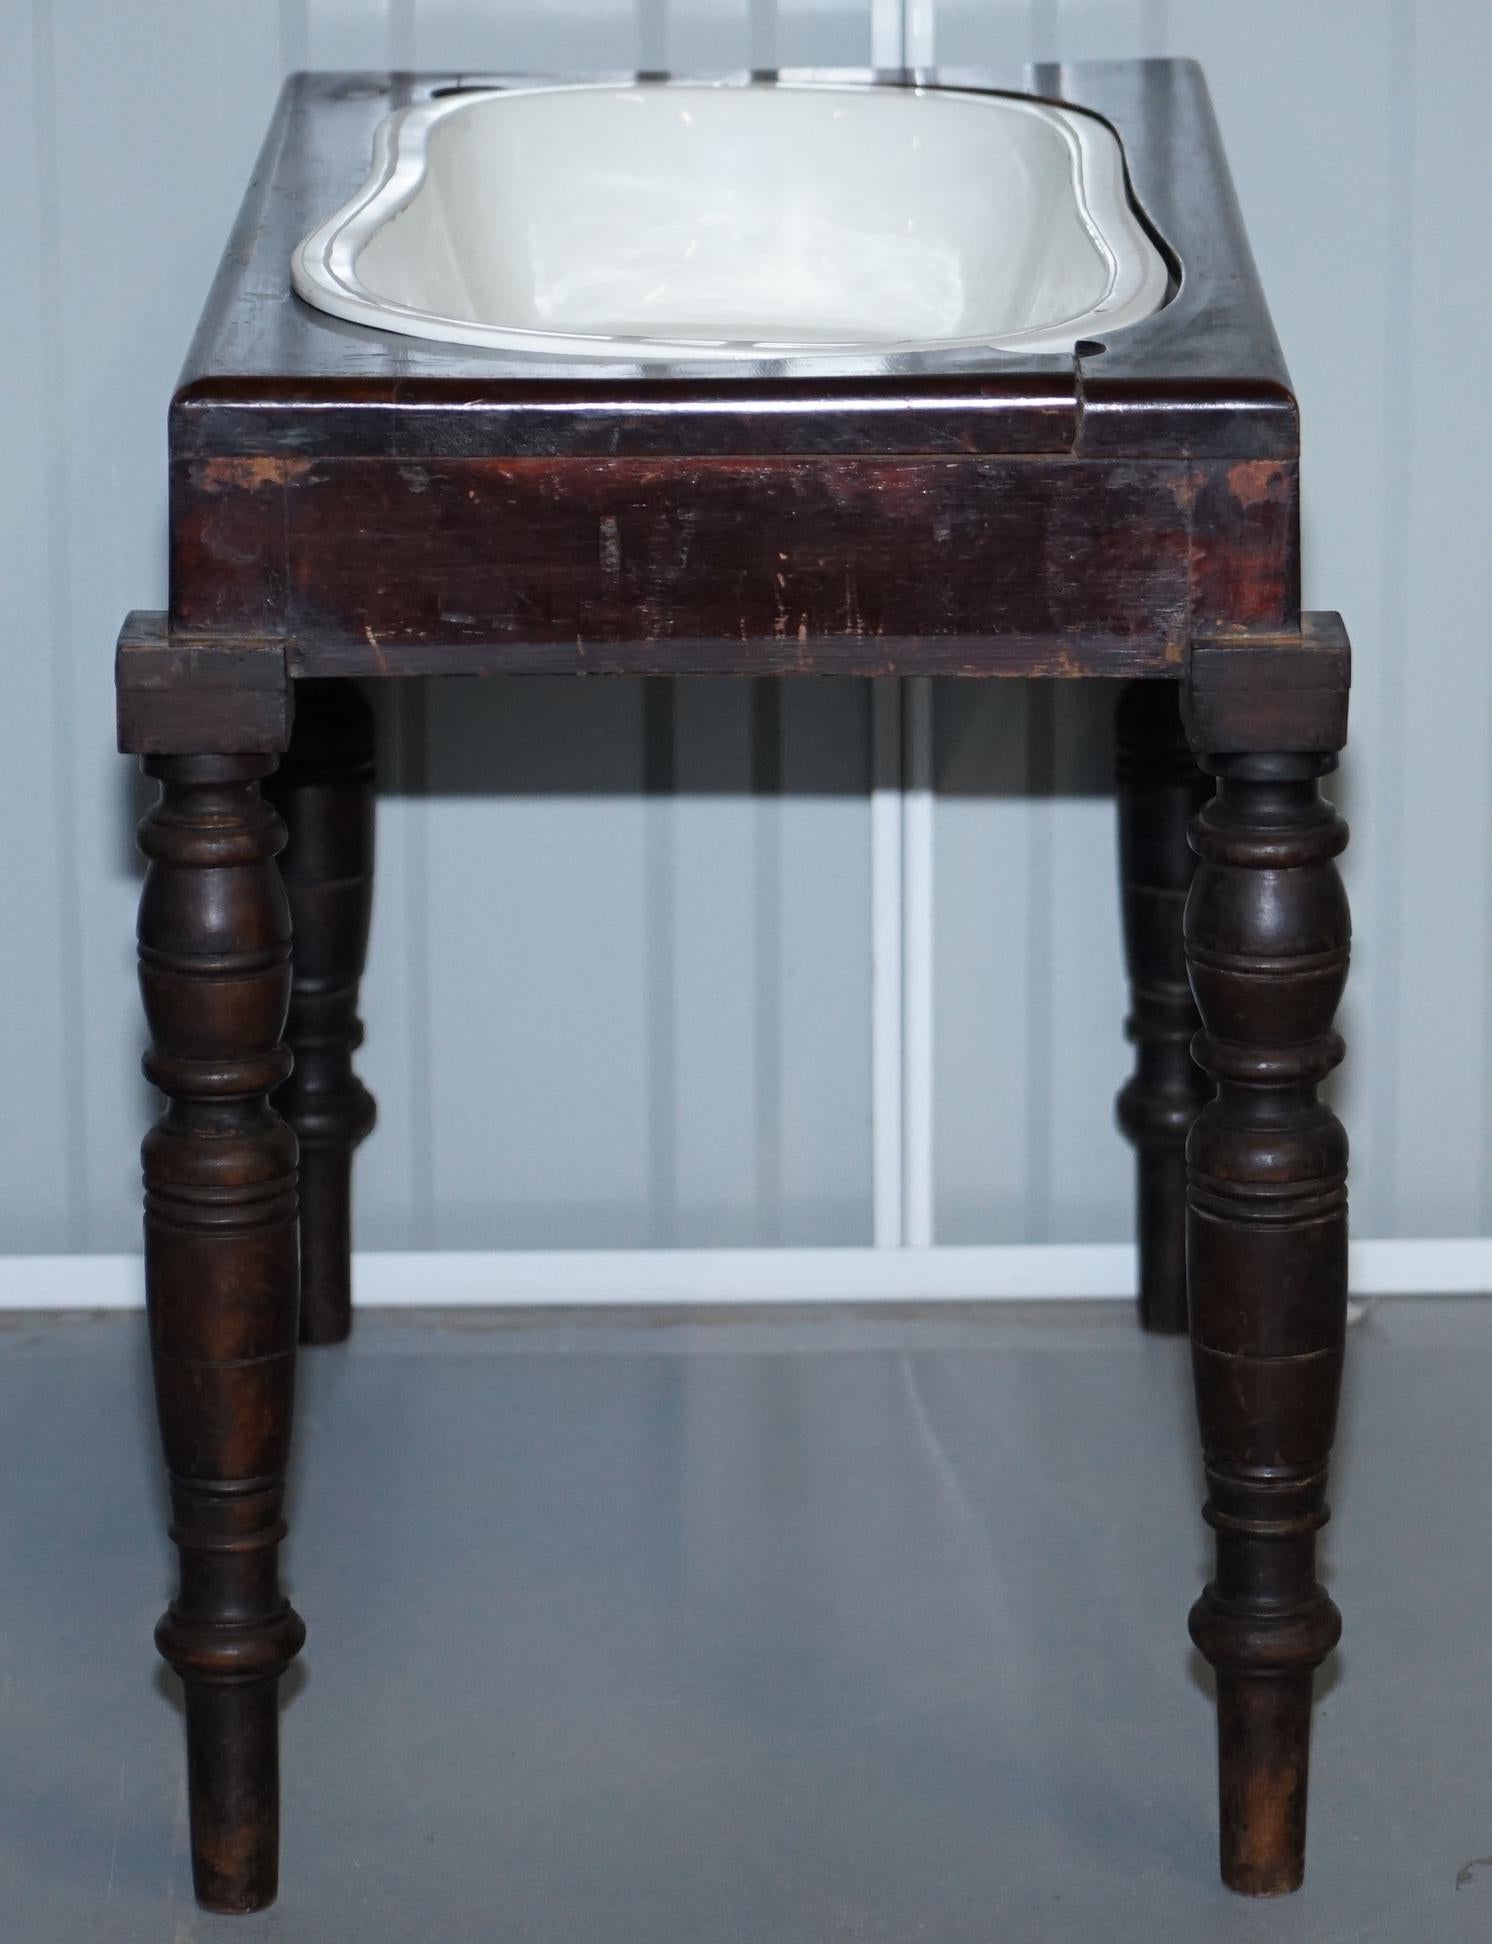 Victorian Side Table with Ceramic Stamped Porcelain Baby or Foot Bath Wash Basin 5